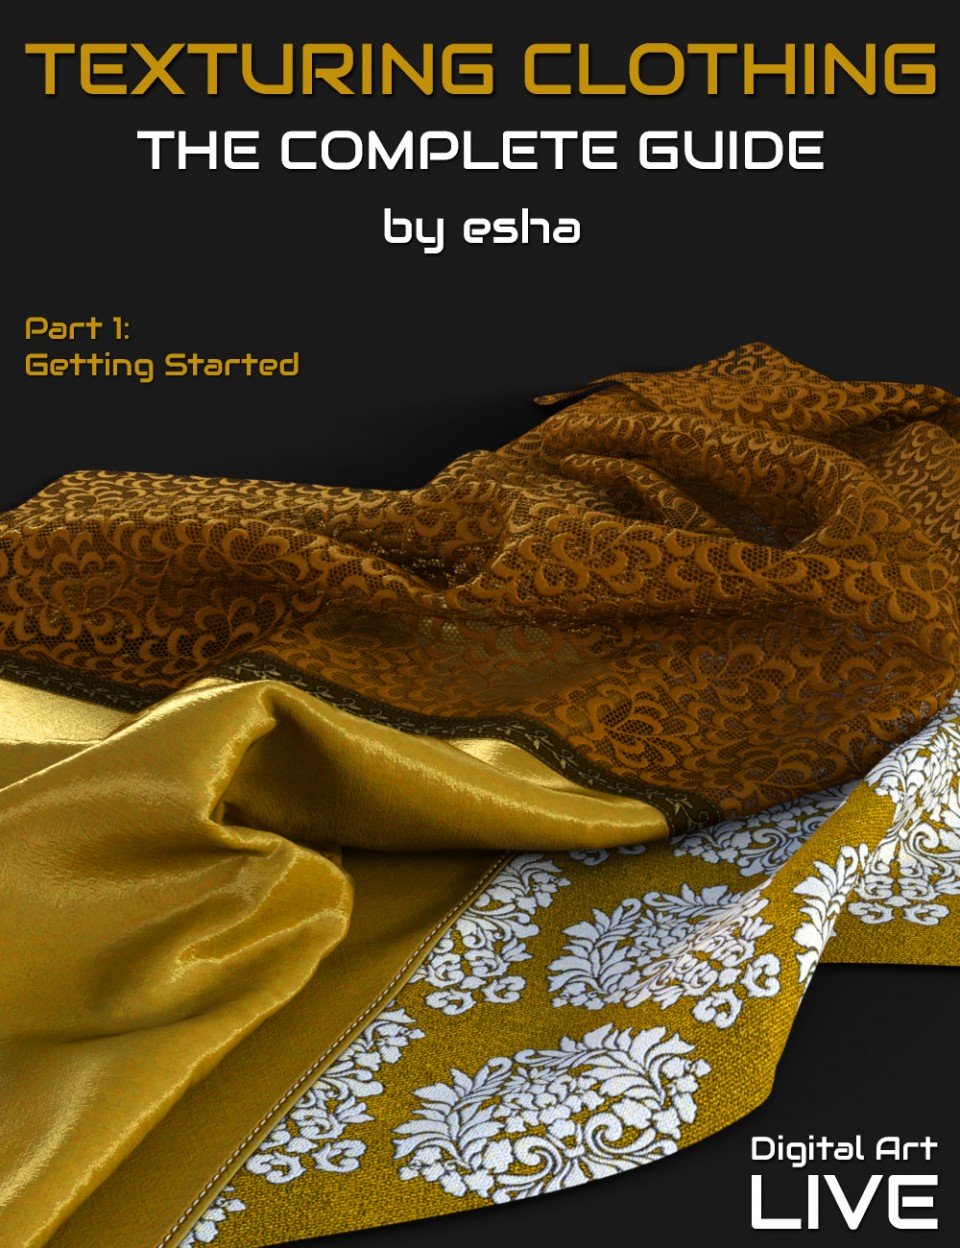 The Complete Guide to Texturing Clothing – Part 1_DAZ3D下载站